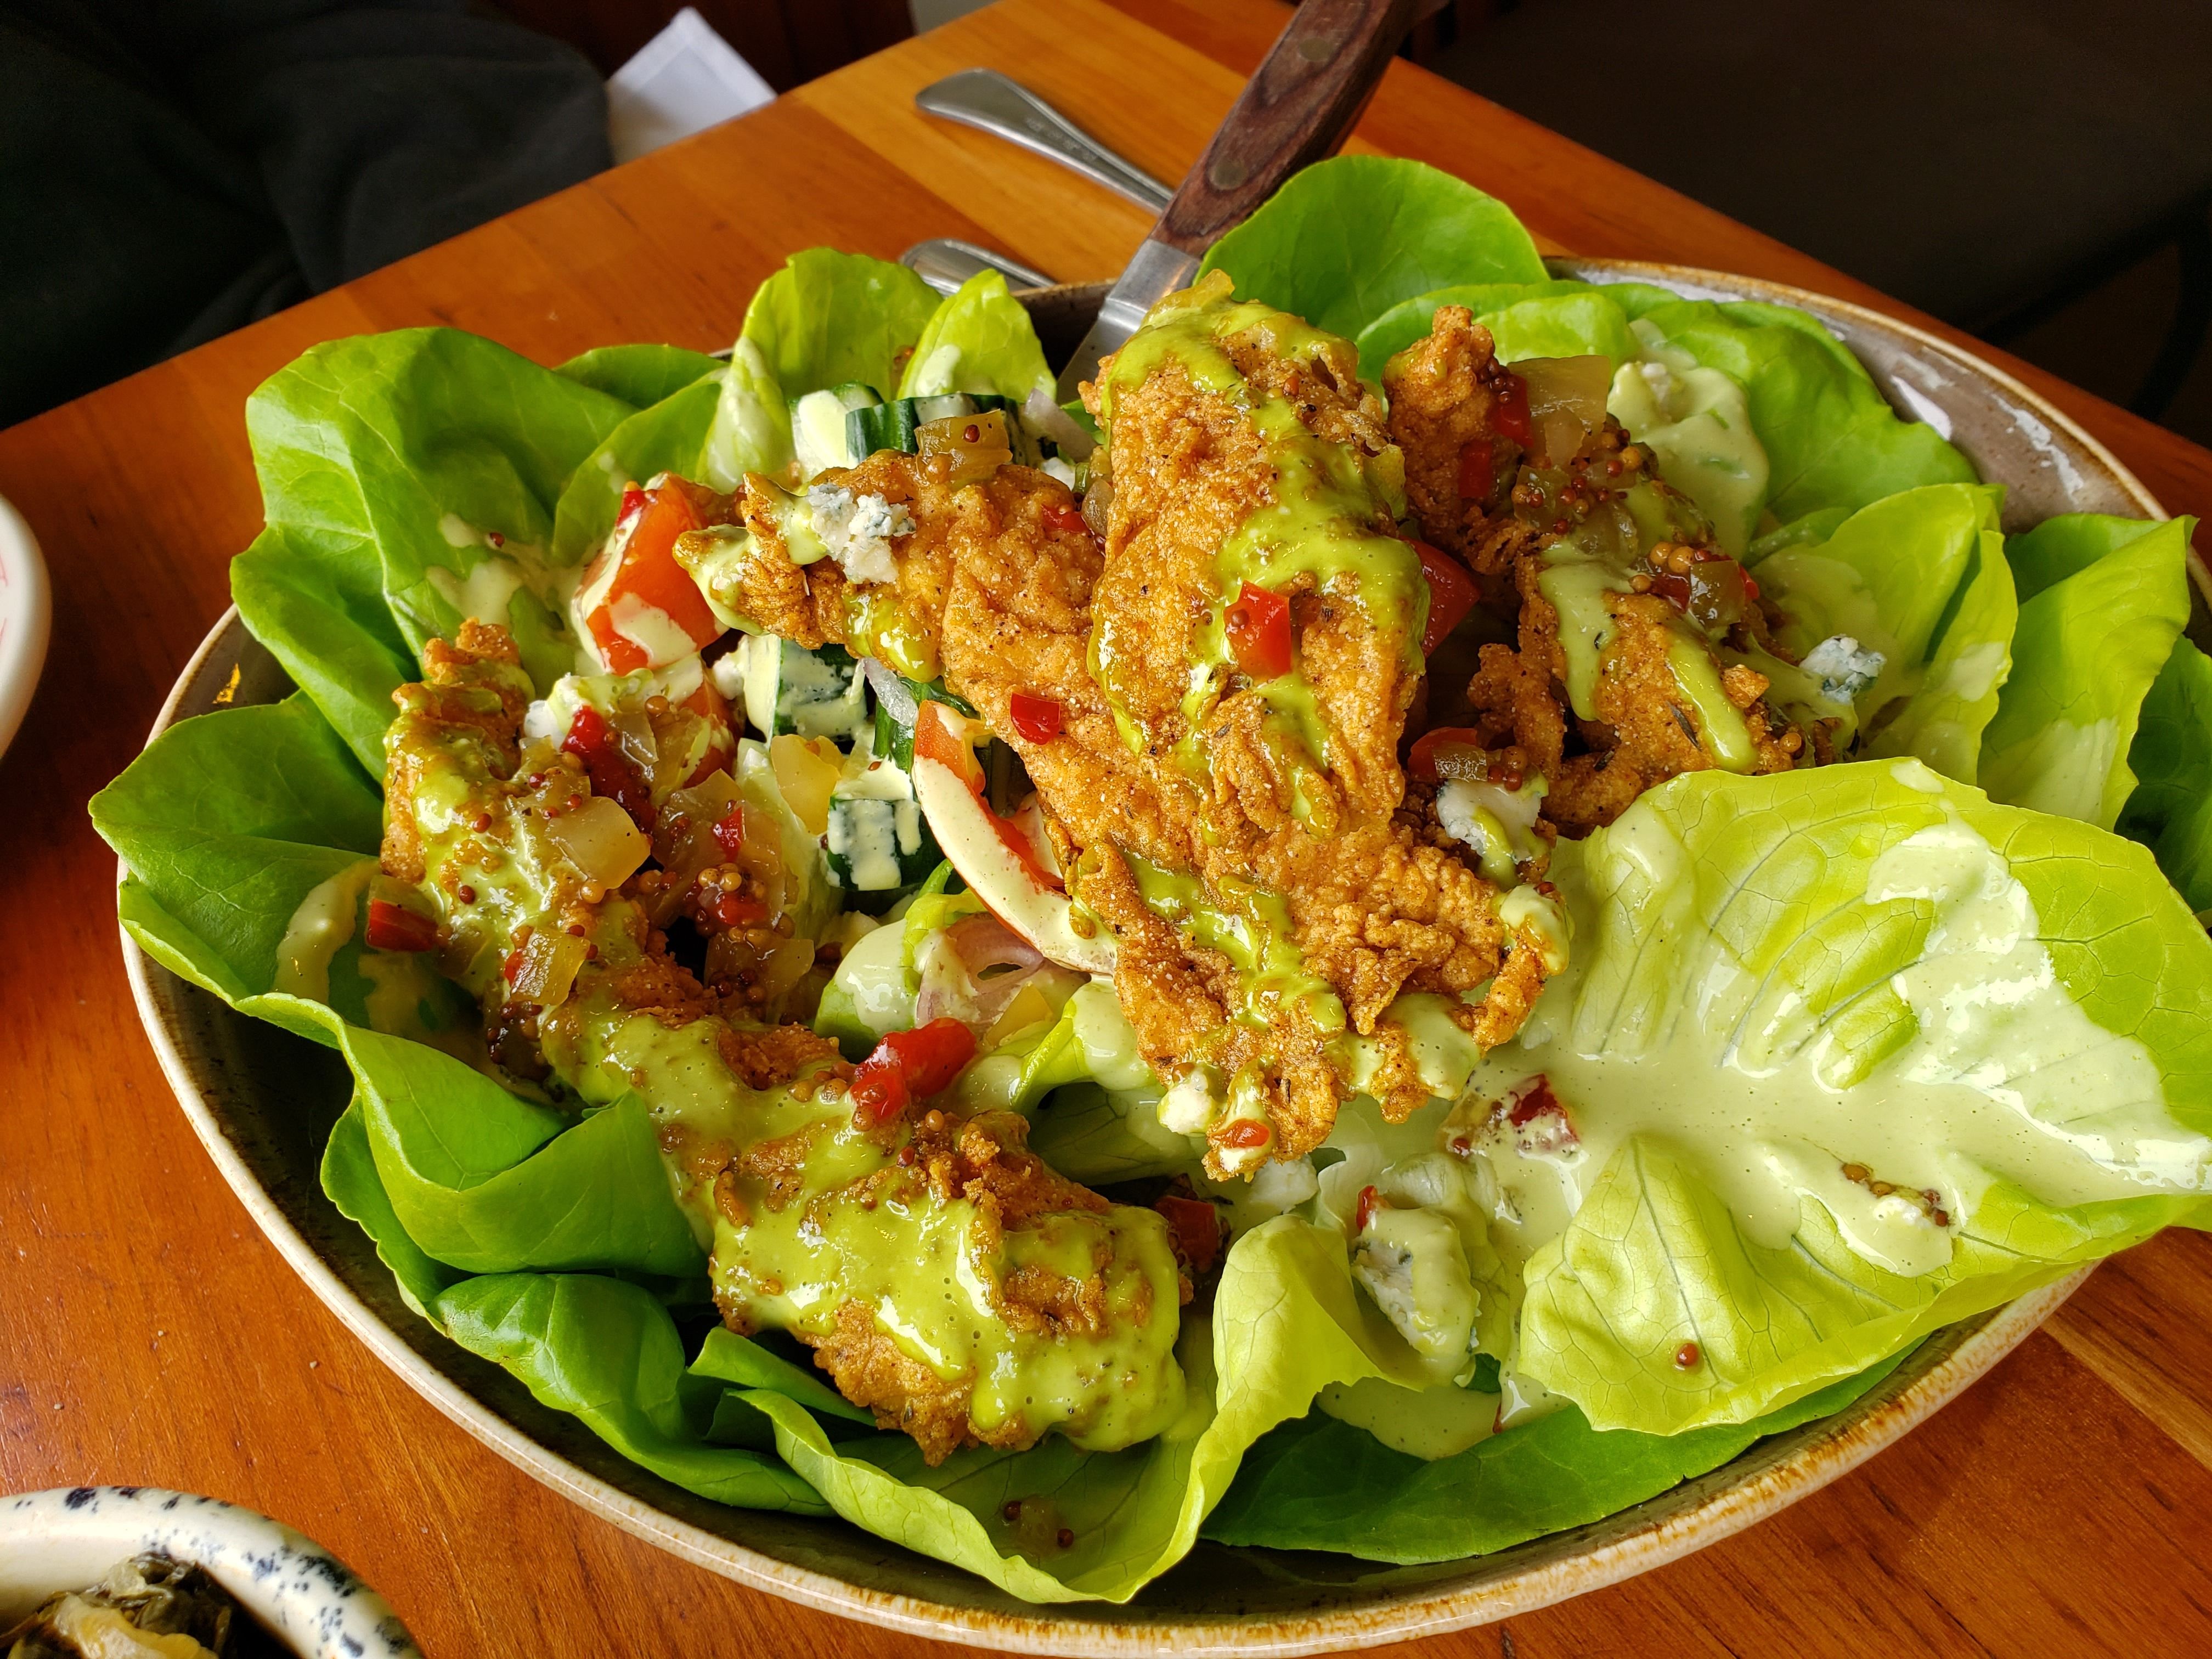 Butter lettuce salad with fried chicken on top.